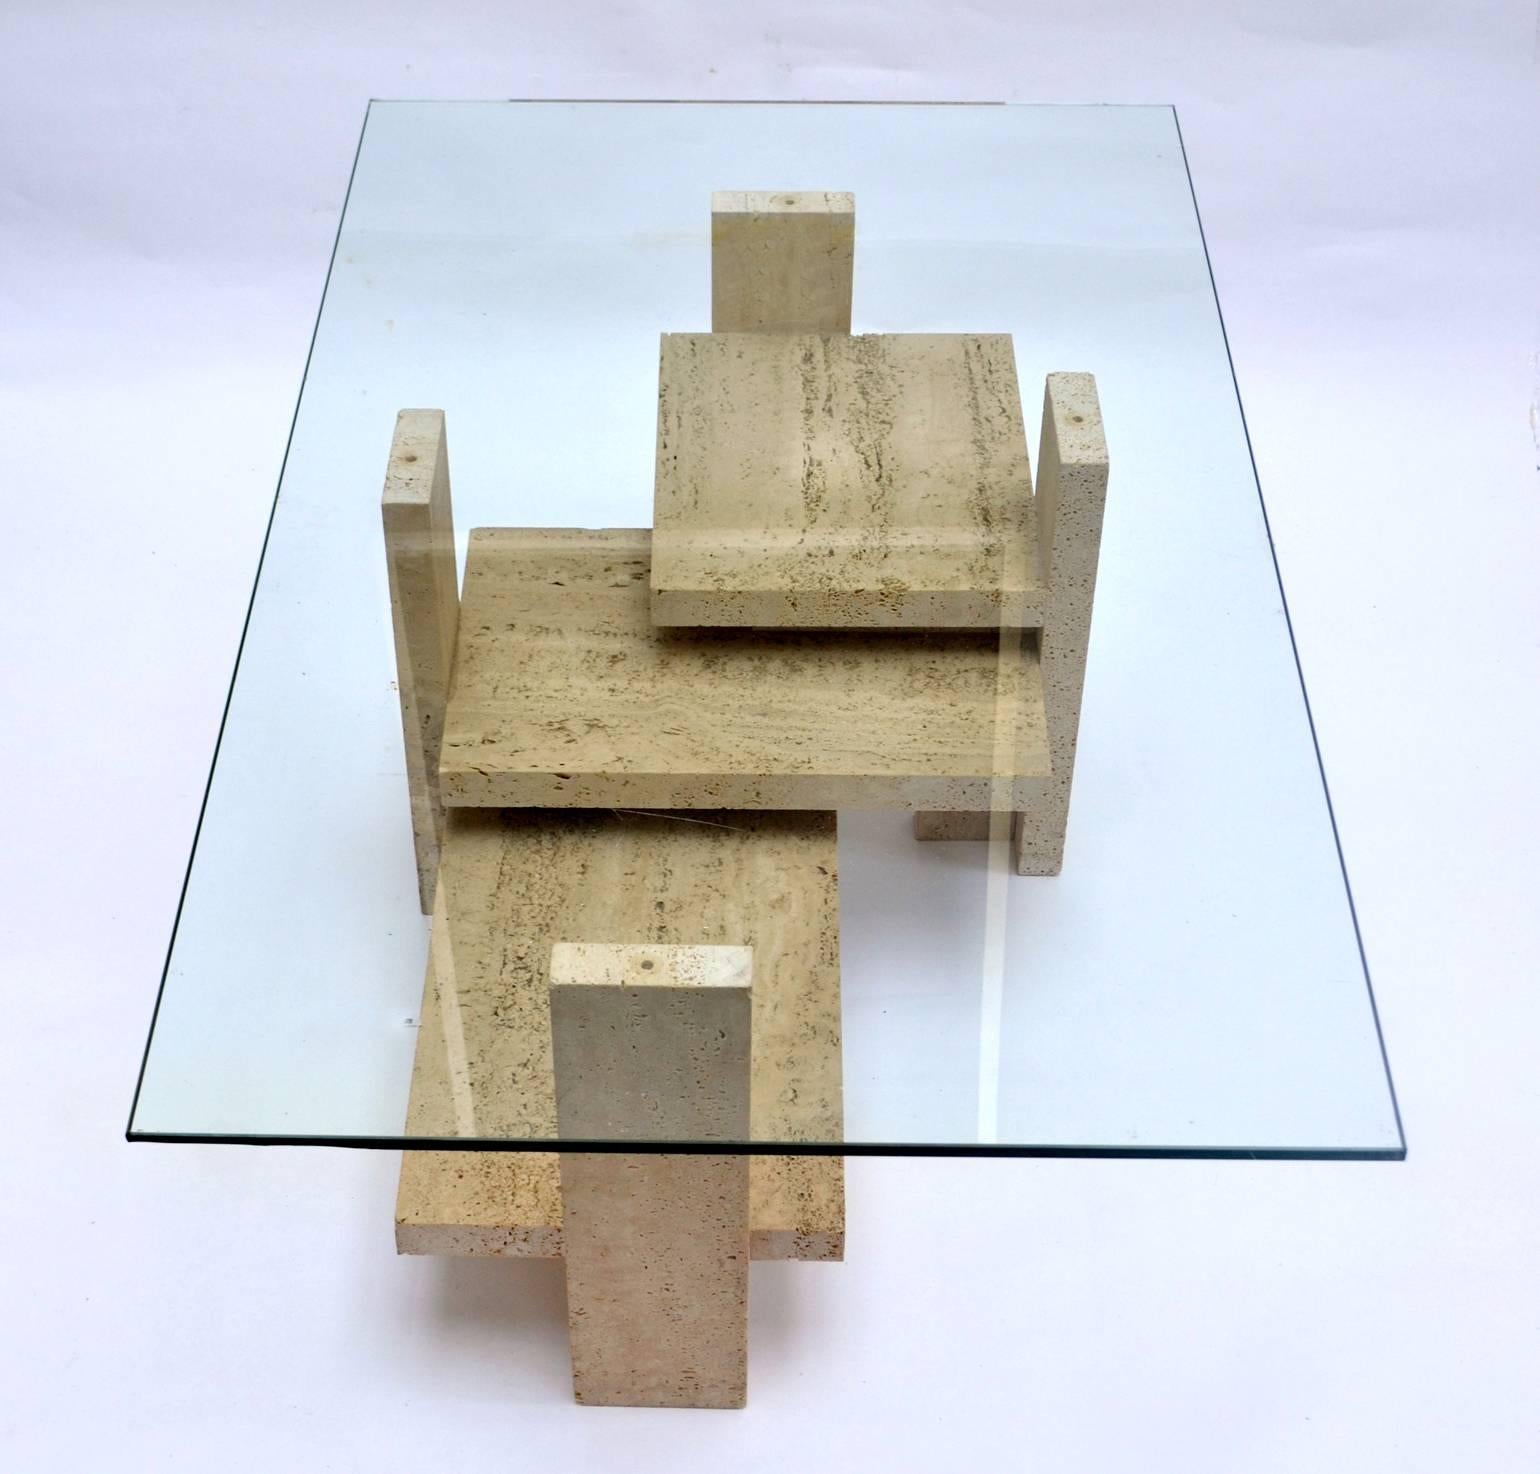 Cubist style coffee table base is build in blocks of travertine. It's form changes from every perspective you see it. #
Designed and hand crafted by Willy Ballez, Belgium 1970's.
Dimensions glass top : 120 x 65 cm 
Thickness glass; 15 mm 
Dimensions